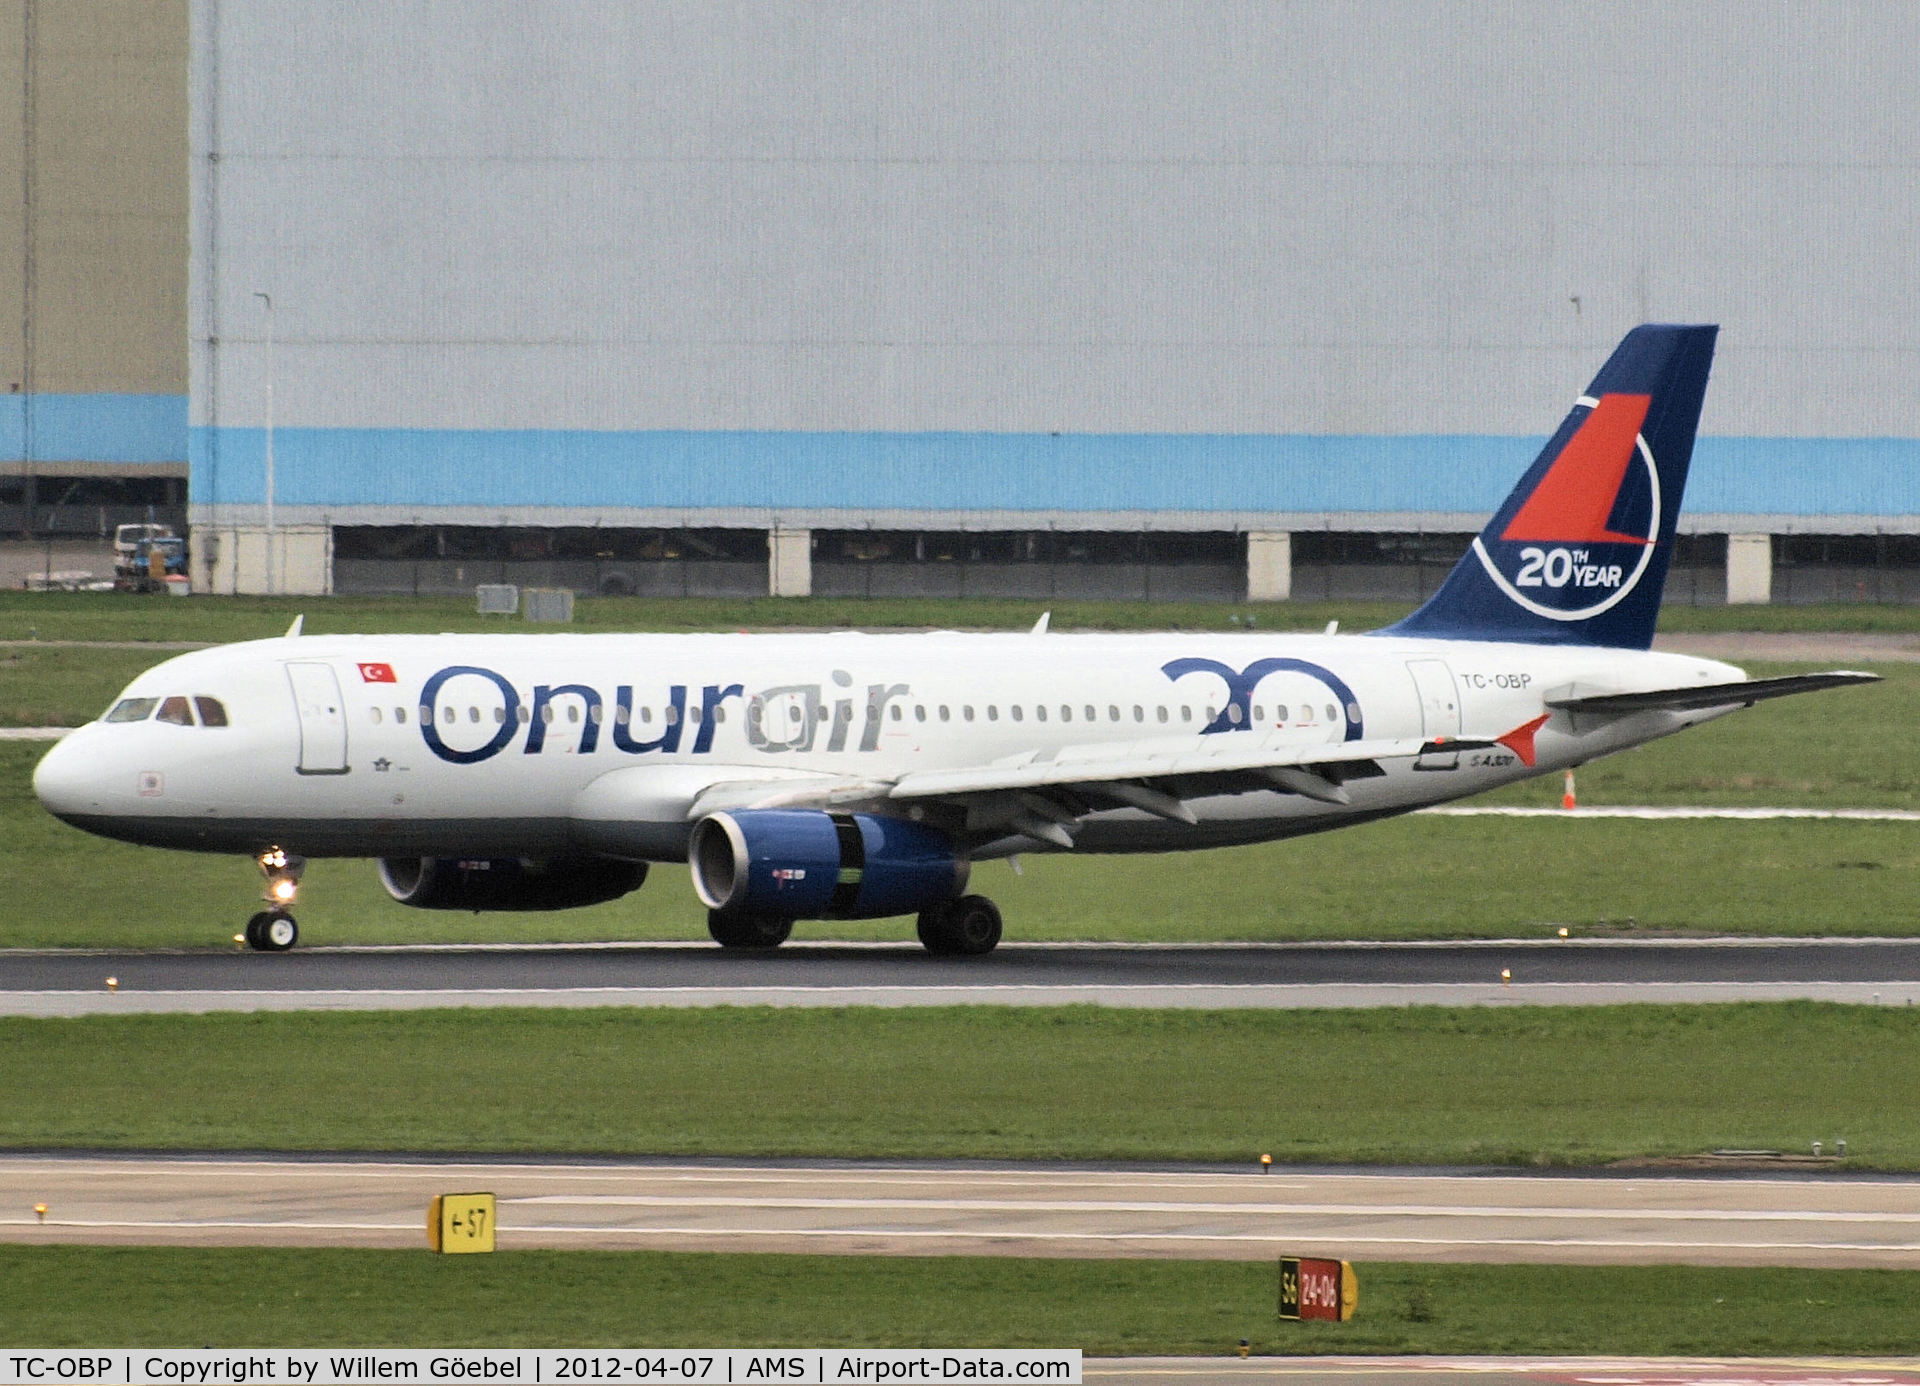 TC-OBP, 1994 Airbus A320-232 C/N 496, Arrival on Schiphol Airport from runway R36